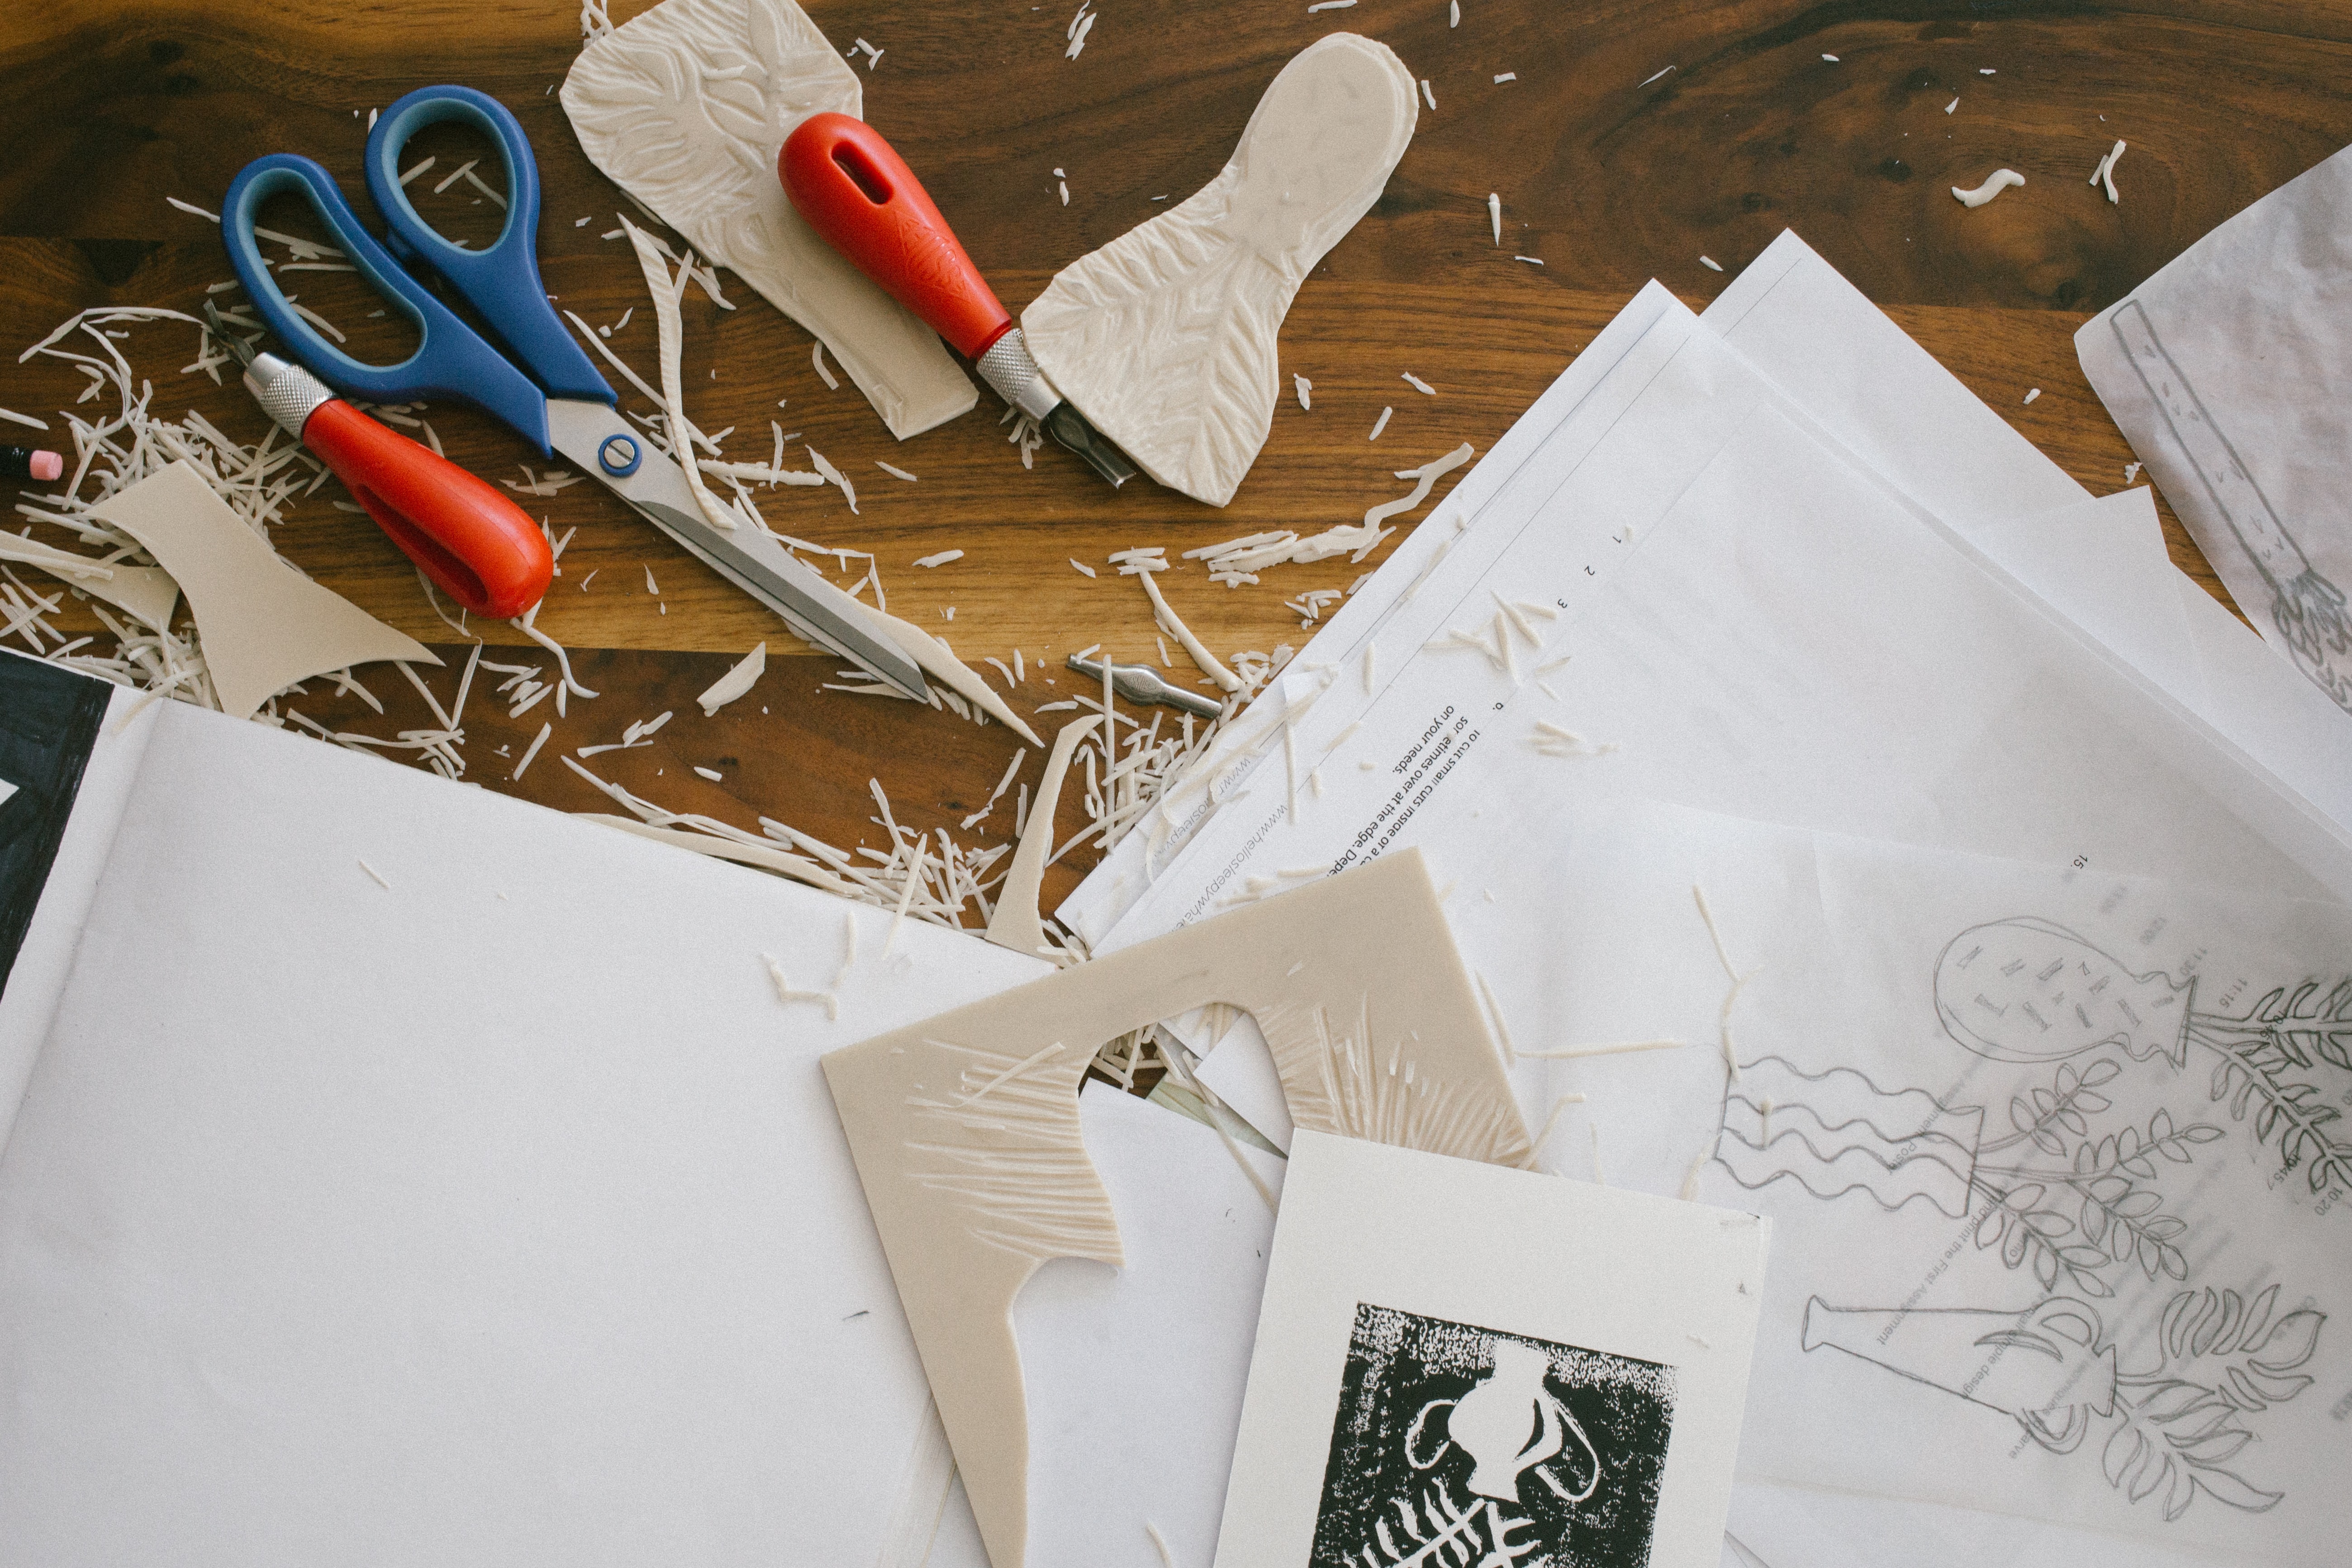 A wooden table with a linocut stamp and print, and pieces of cut out lino scattered around. There are sheets of paper, a pen, a pair of scissors and other utensils, as well as a tracing paper sketch.